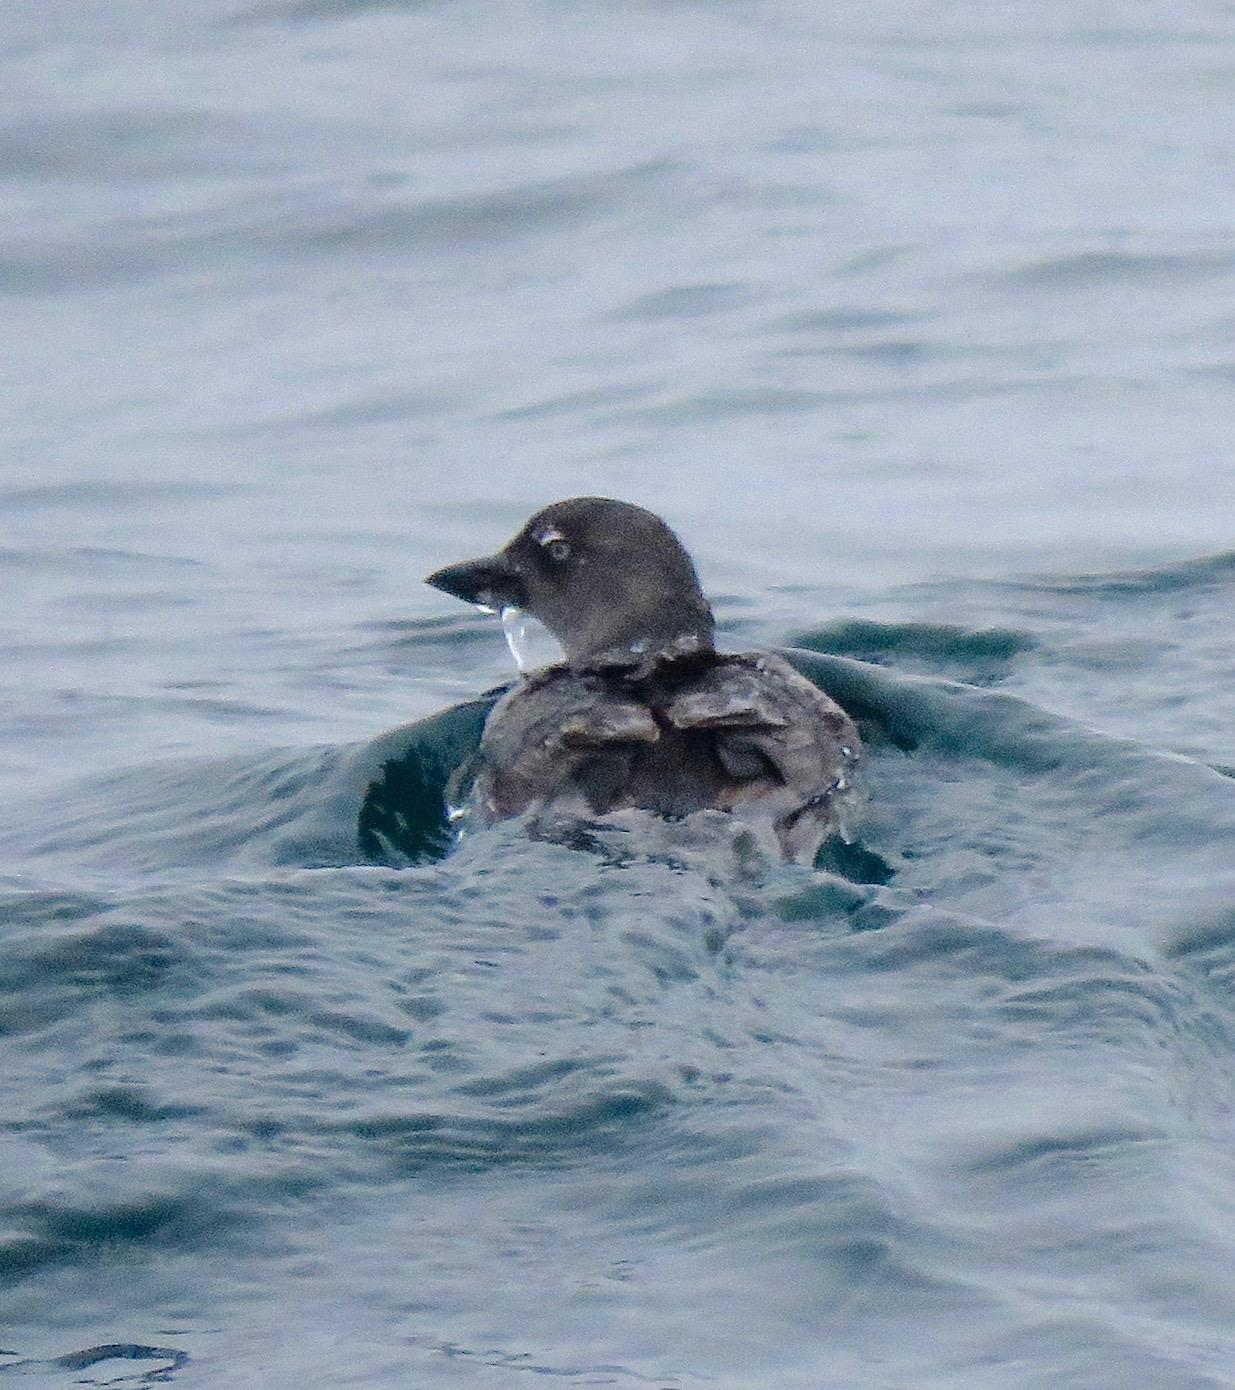 Cassin's Auklet Photo by Don Glasco